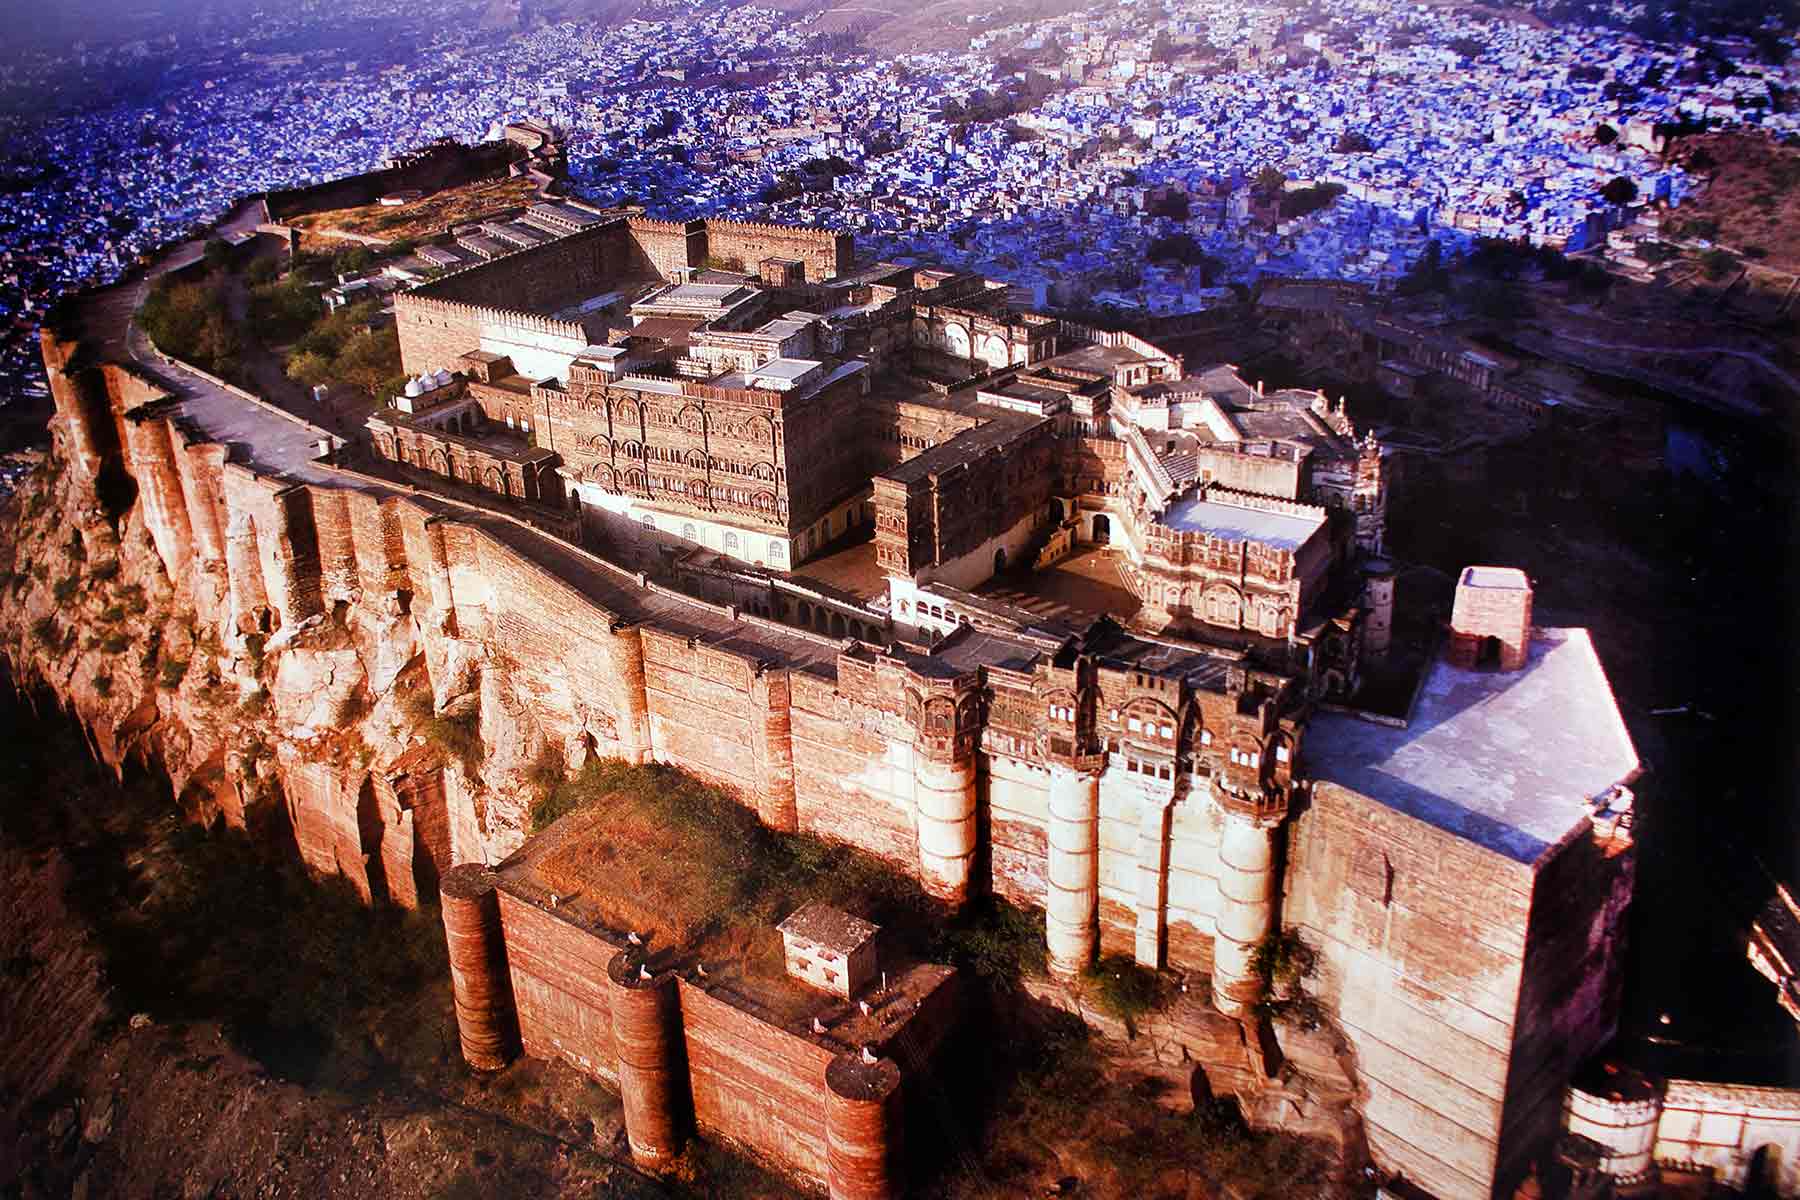 An image showing the aerial view of the magnificent Mehrangarh Fort